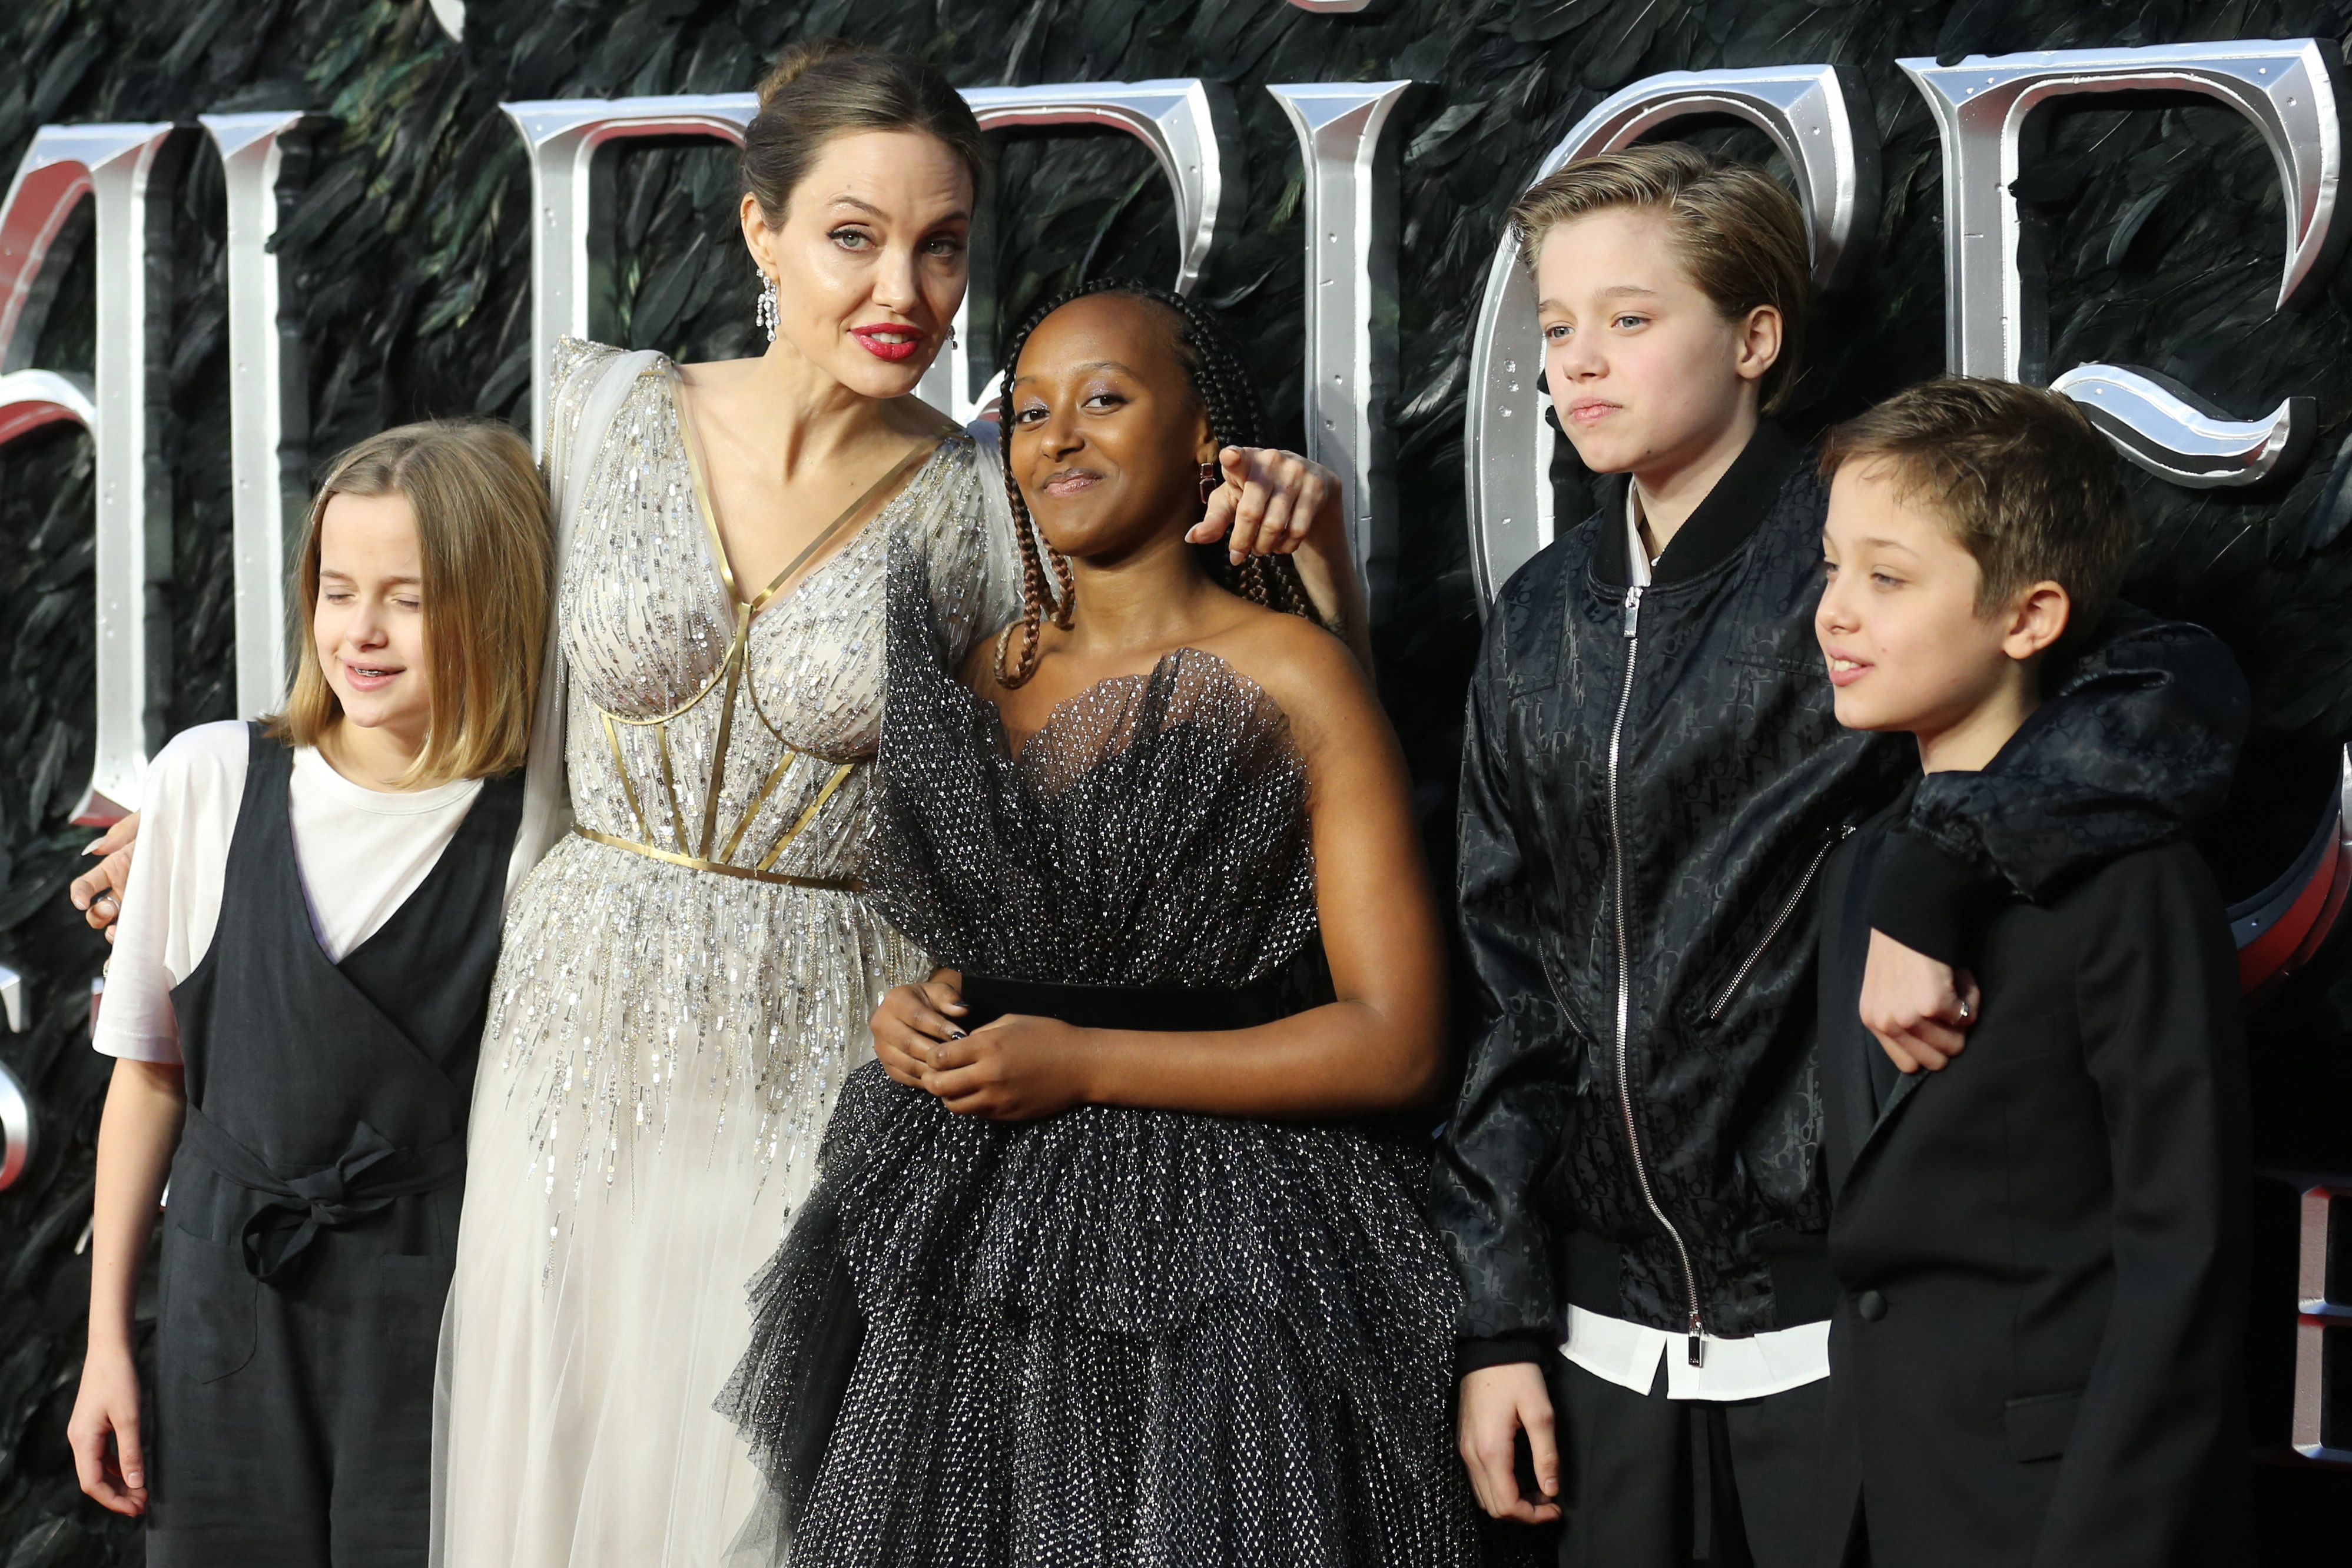 Angelina Jolie poses with her children on the red carpet at the European premiere of the film "Maleficent: Mistress of Evil" in London on October 9, 2019 | Source: Getty Images